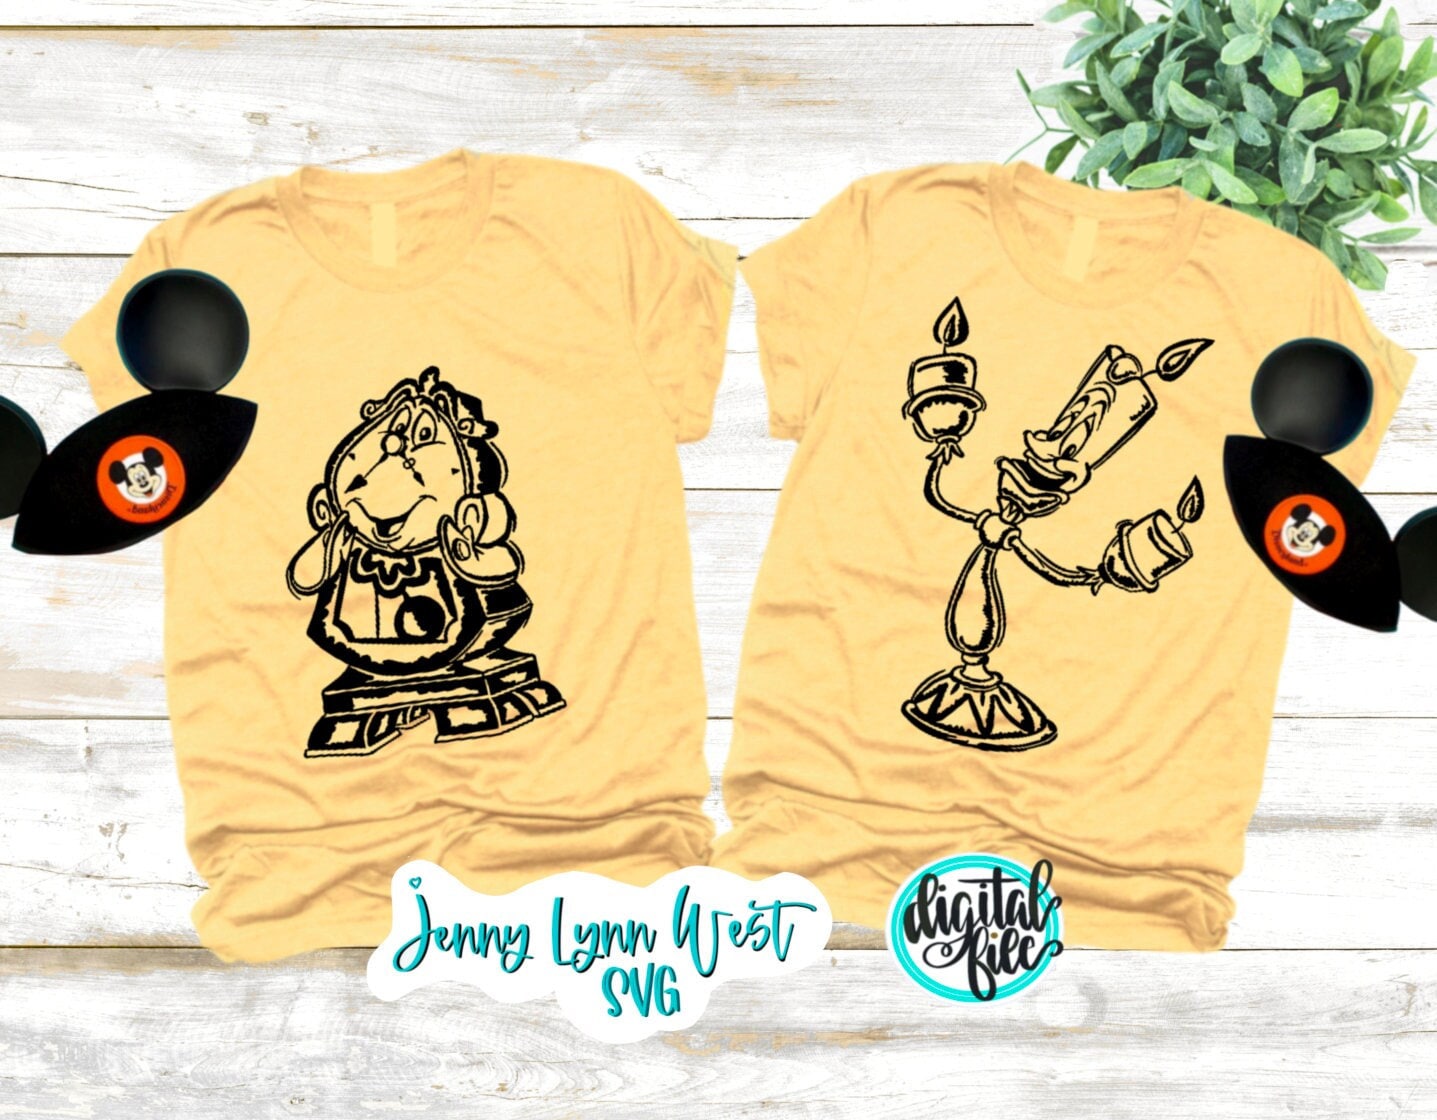 Lumiere SVG Cogsworth SVG Beauty and Beast Sketch DisneySVG Cut File Shirts Silhouette Cricut Heat Transfer Sublimation PNG svg dxf